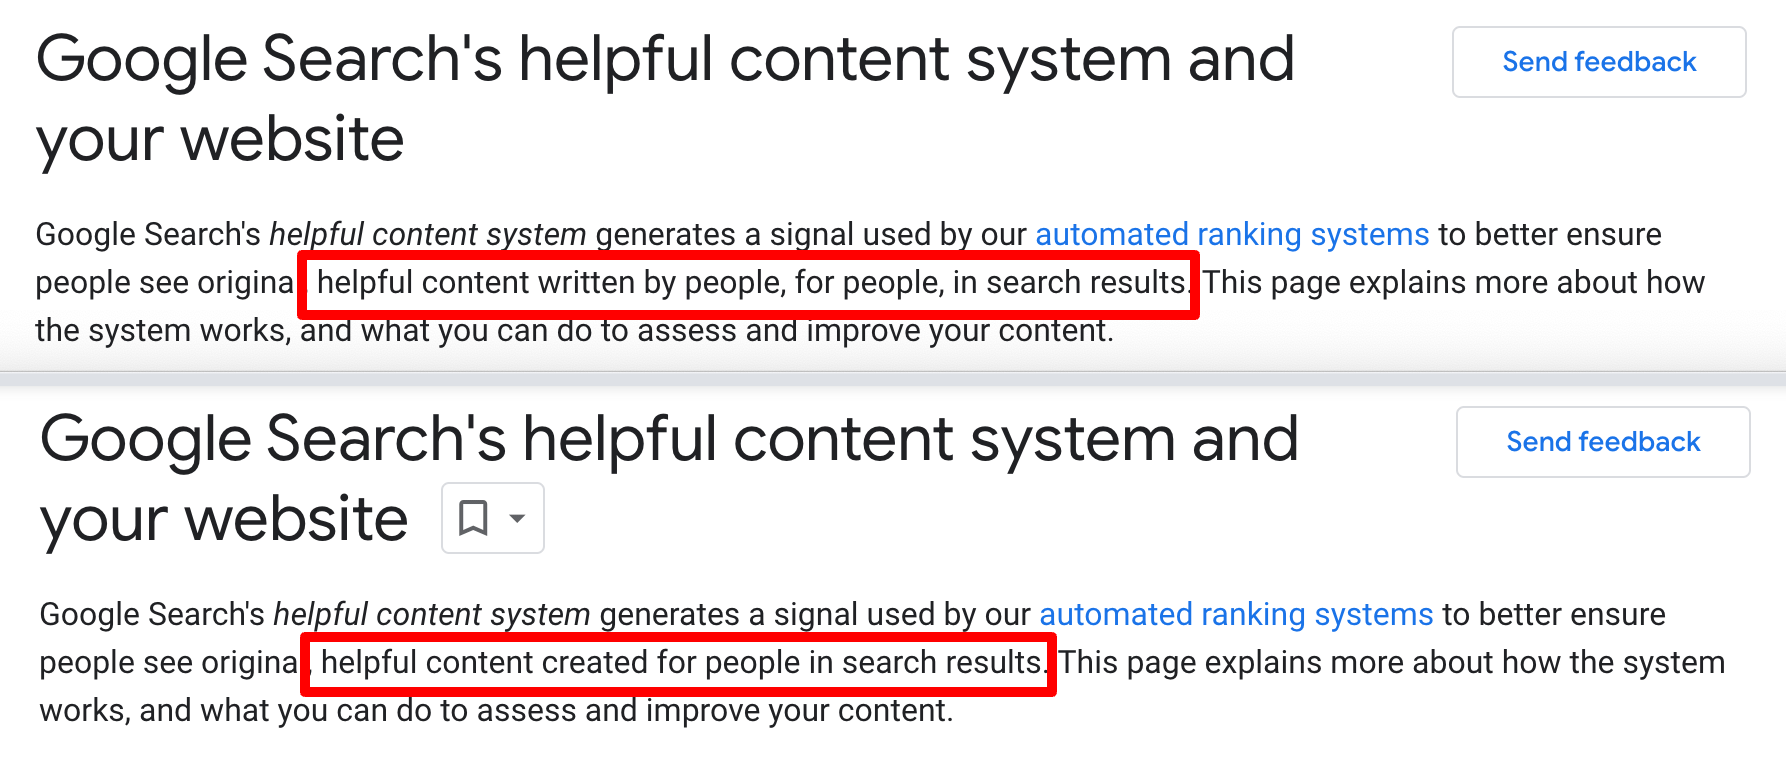 Google’s helpful content documentation before and after the latest update, courtesy Barry Schwartz / Search Engine Roundtable